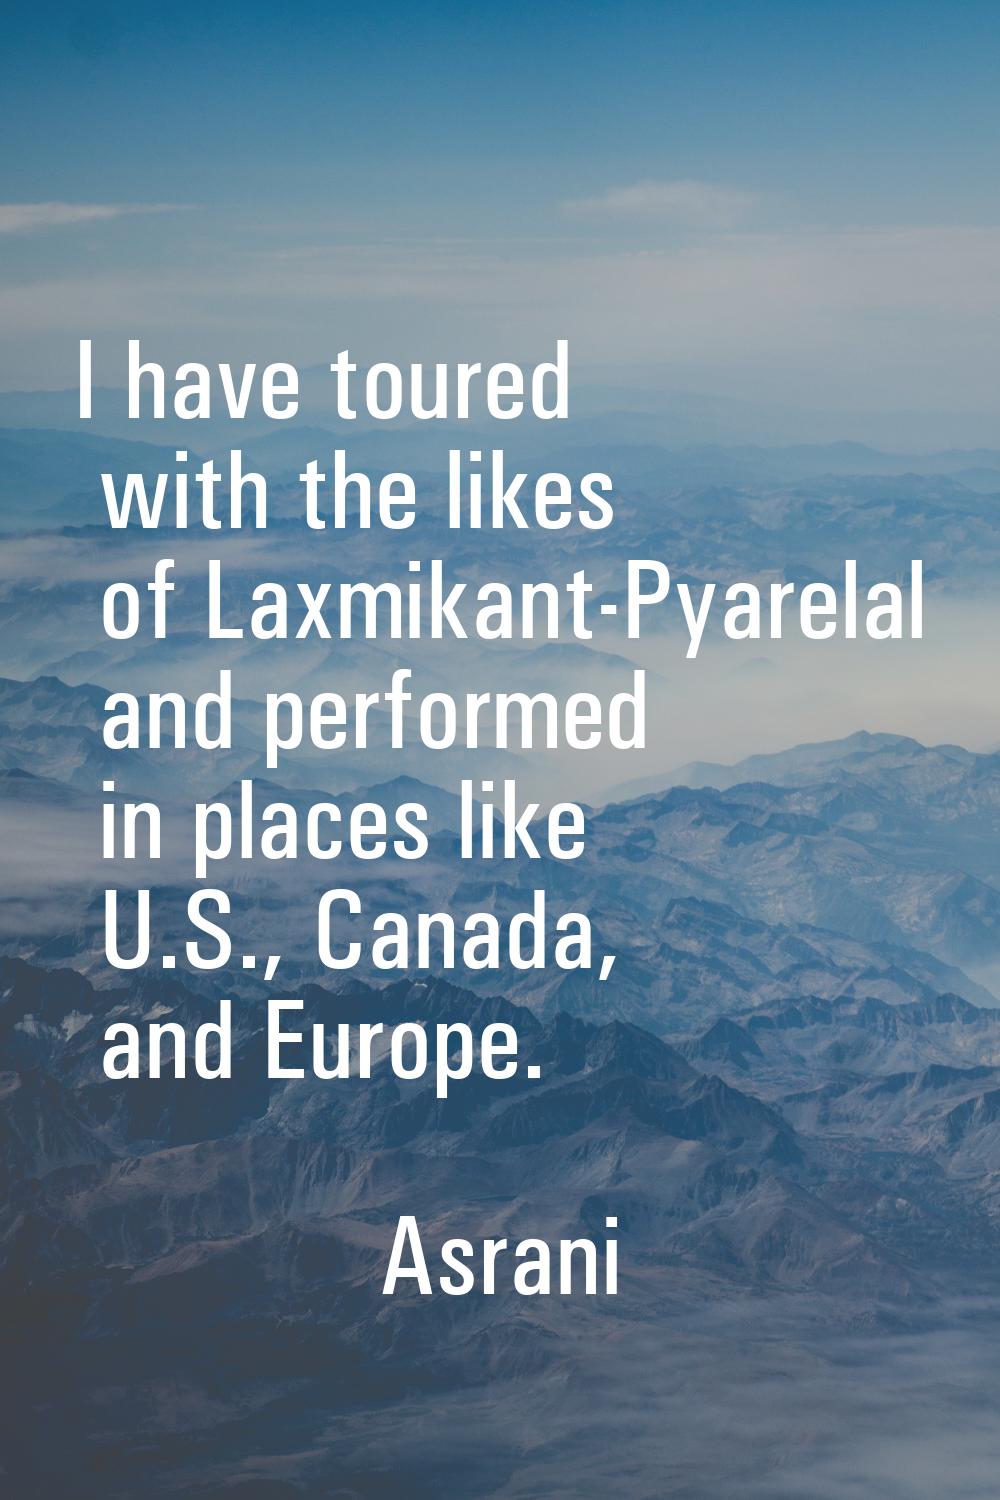 I have toured with the likes of Laxmikant-Pyarelal and performed in places like U.S., Canada, and E